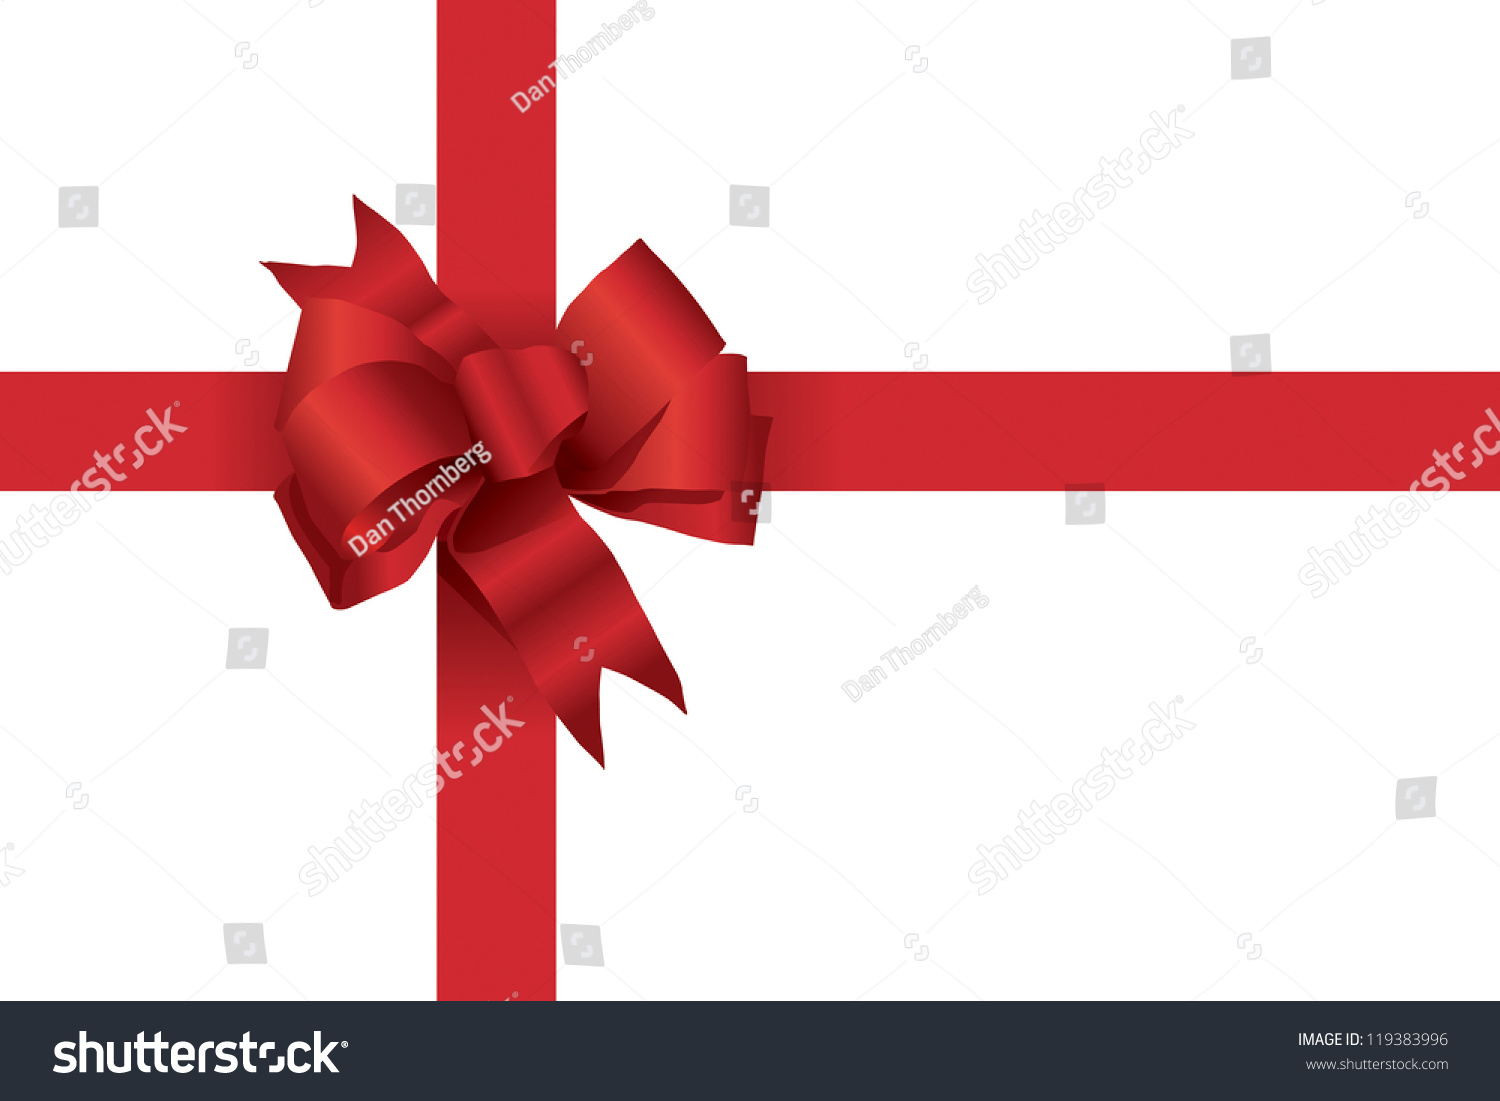 Vector Image Red Christmas Ribbons Bow Stock Vector (Royalty Free ...